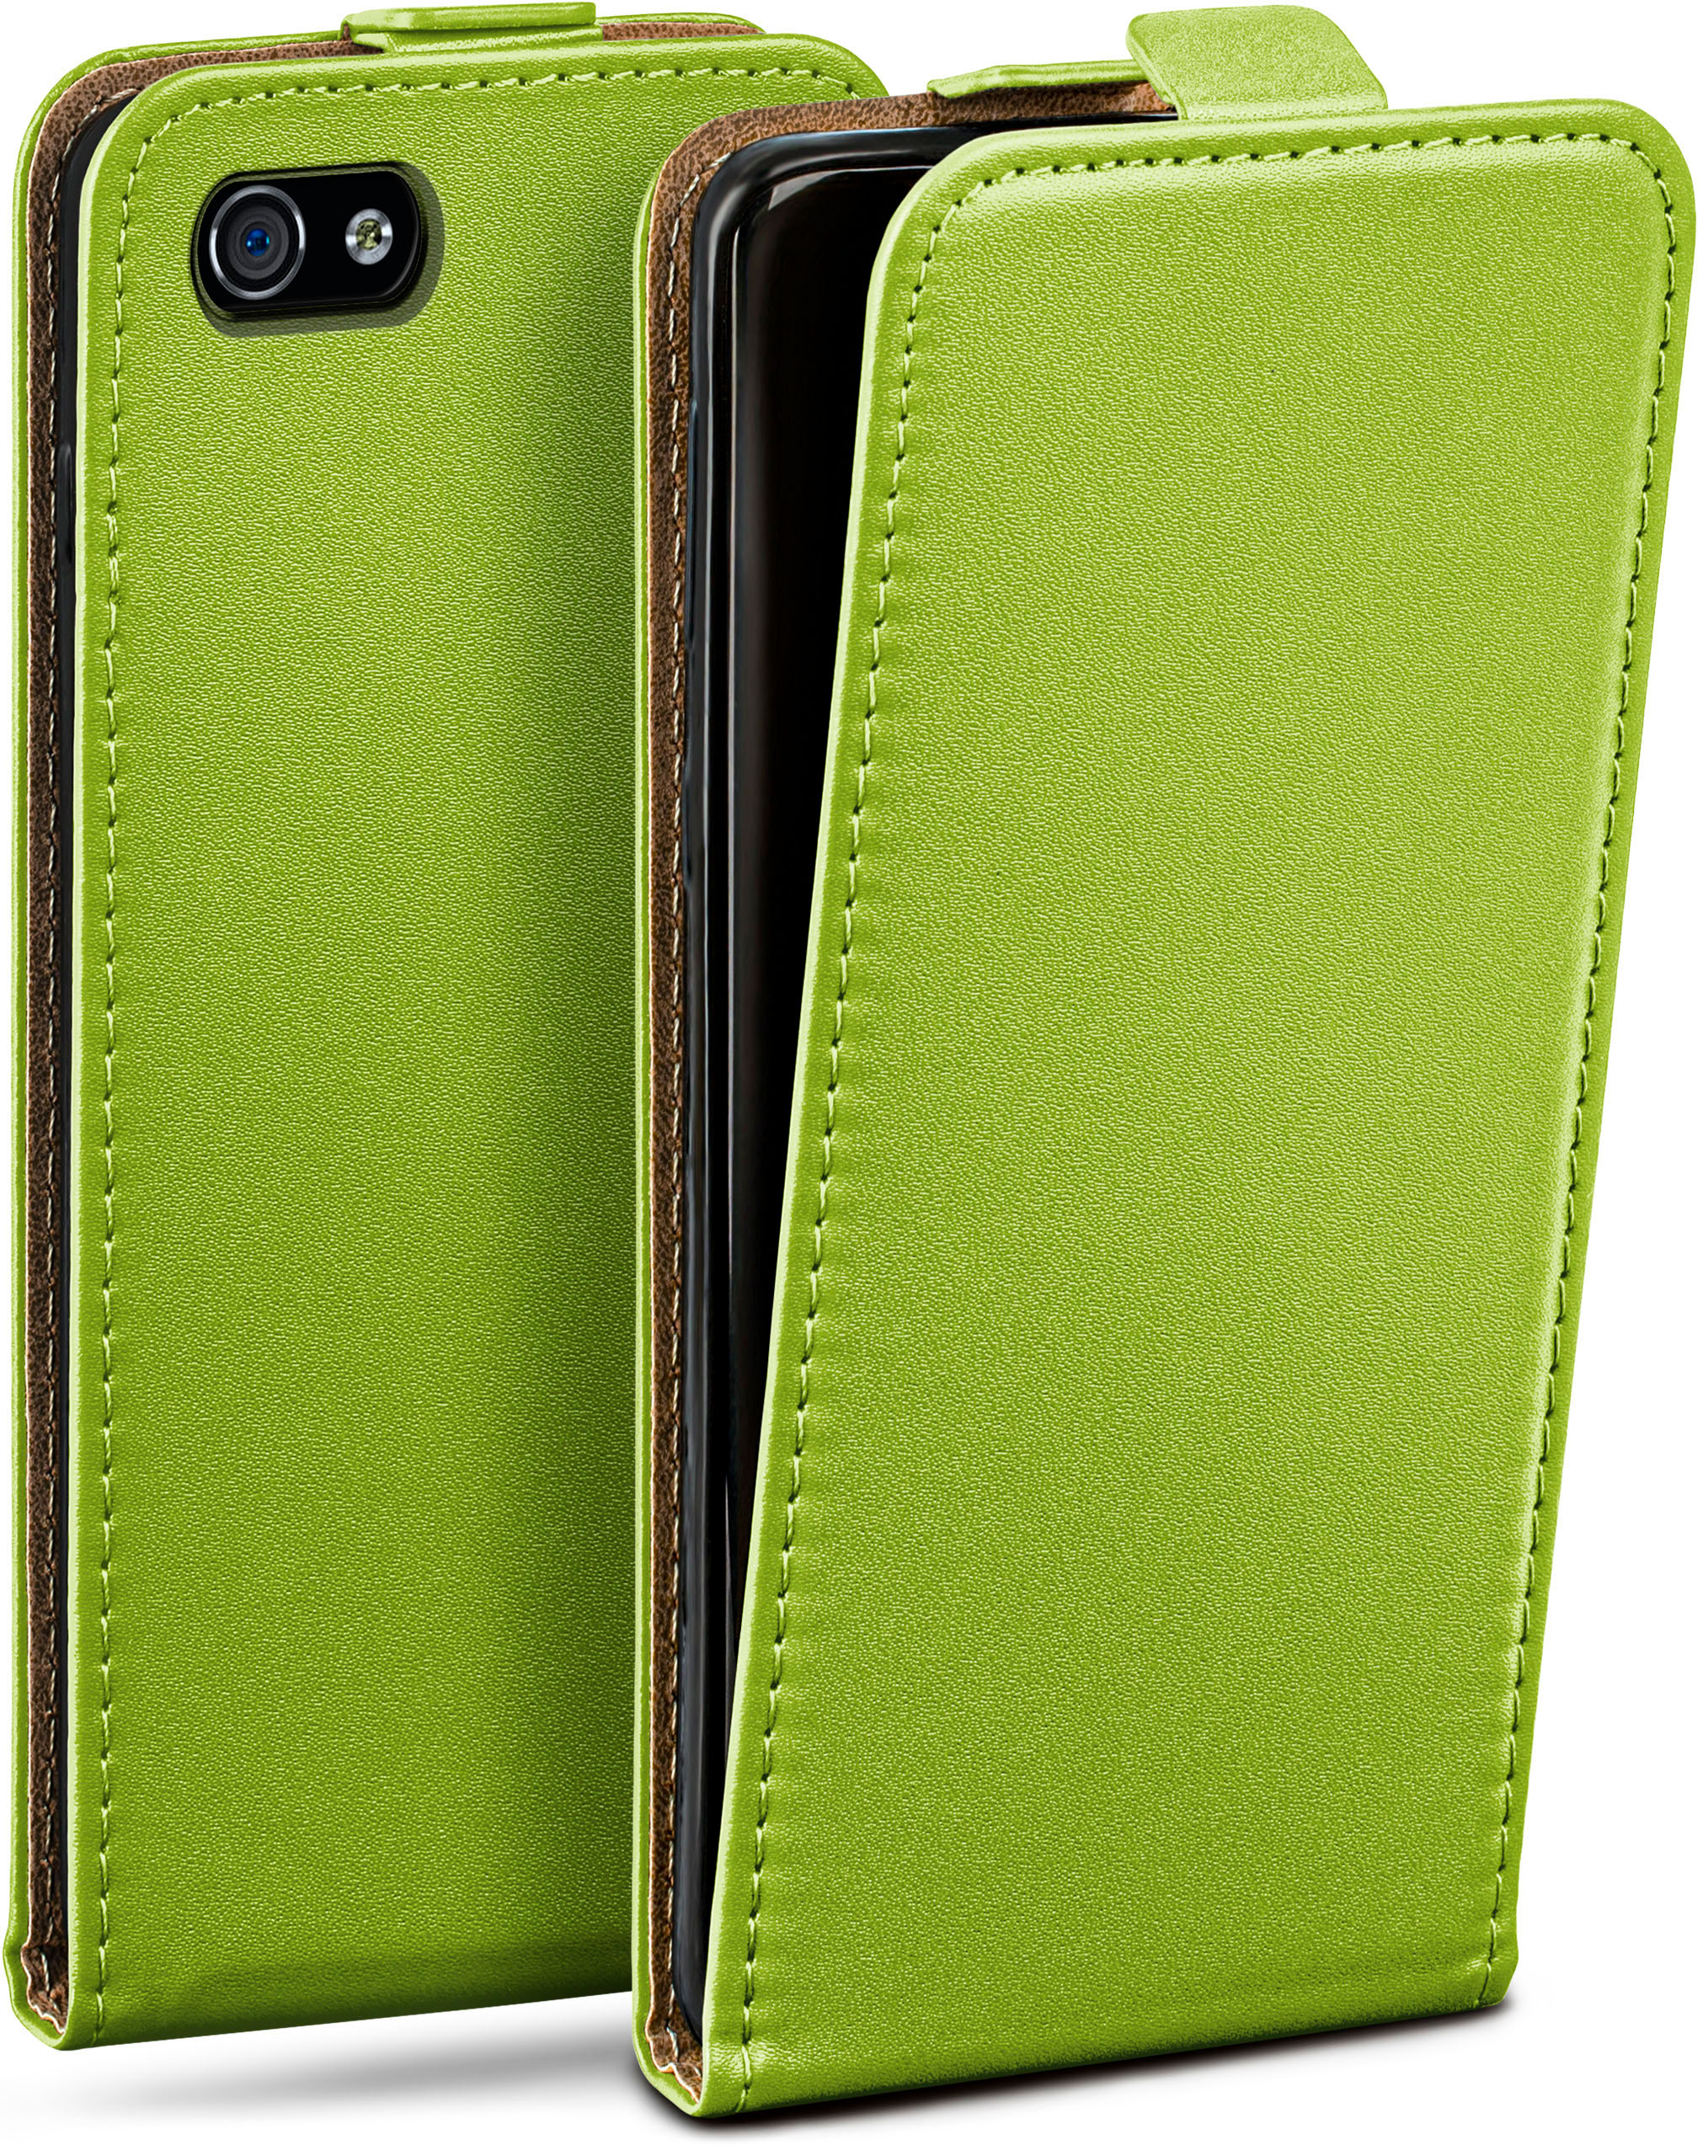 Lime-Green / Apple, iPhone Flip iPhone 4, MOEX Flip 4s Case, Cover,